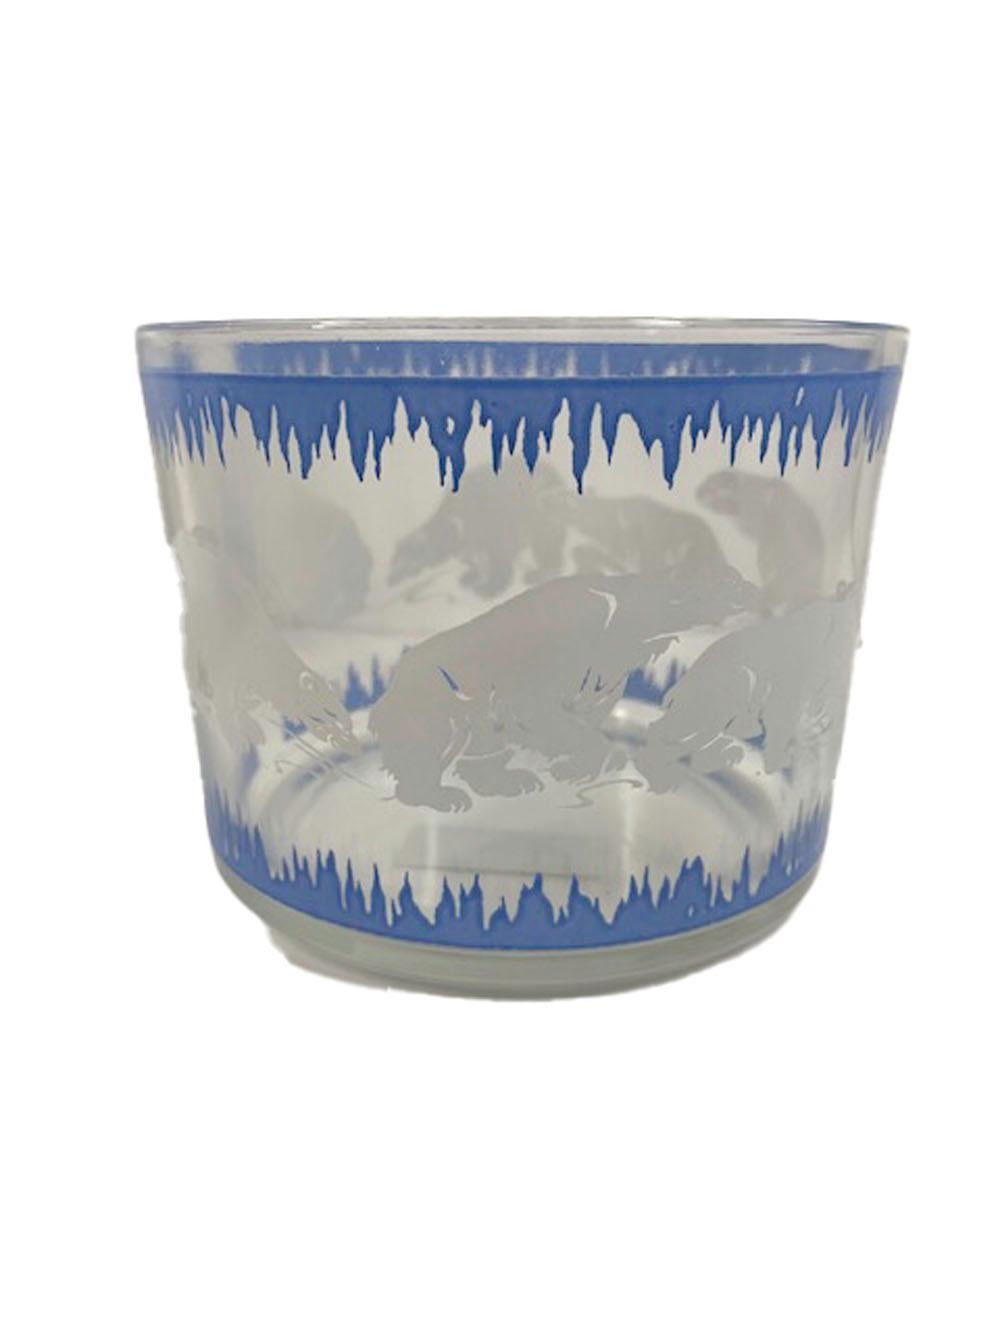 Art Deco cocktail shaker and ice bowl from the Sportsmans Series by Hazel-Atlas decorated with white polar bears between two bands of blue icicles.